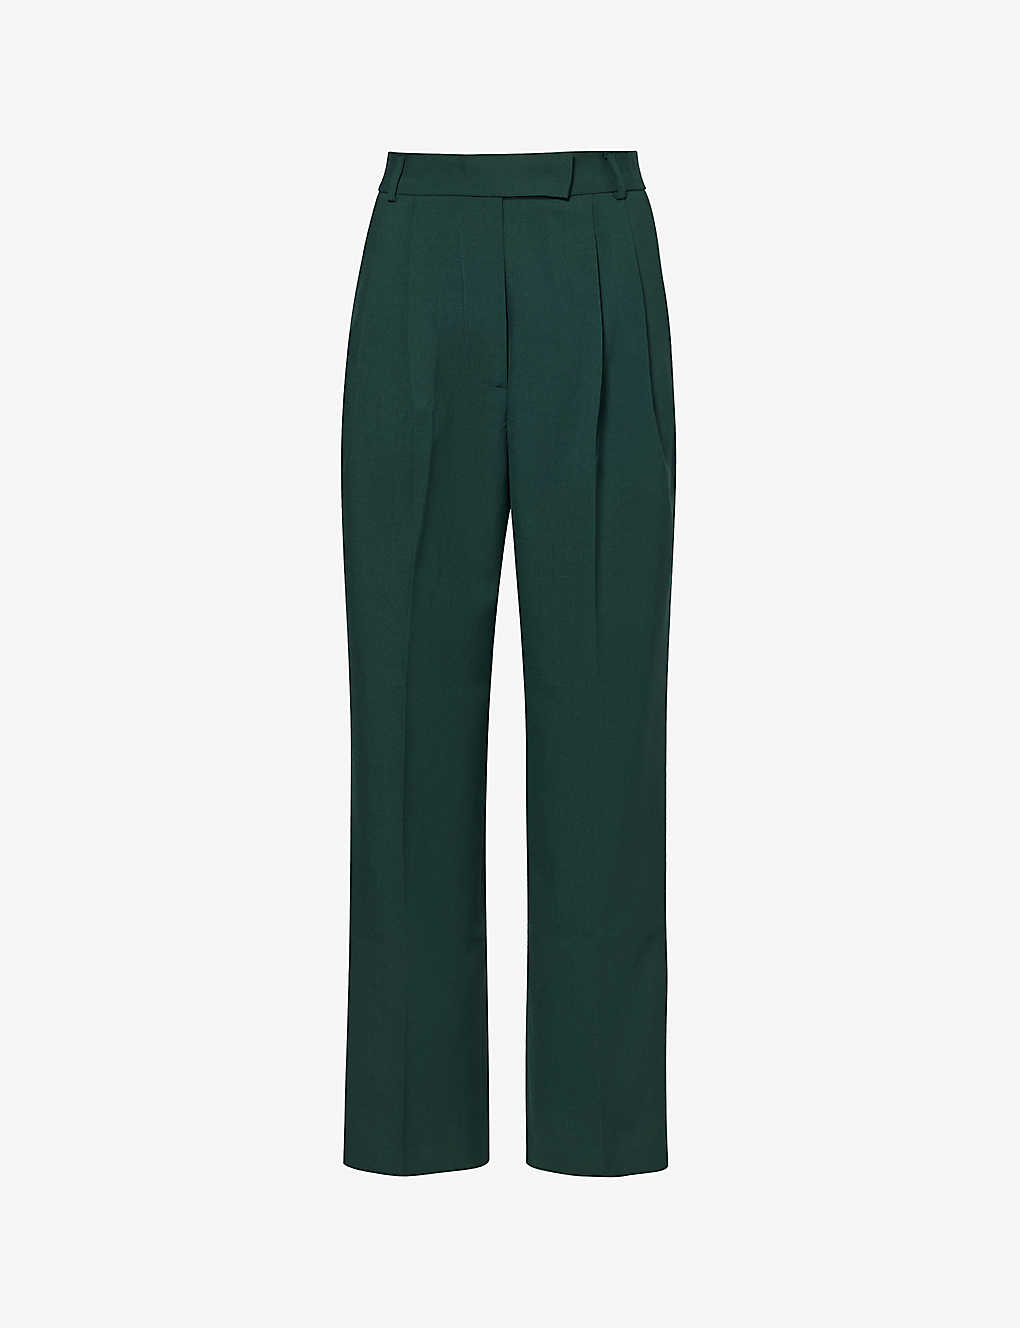 The Frankie Shop Layton Pleated Wool-blend Trousers In Green